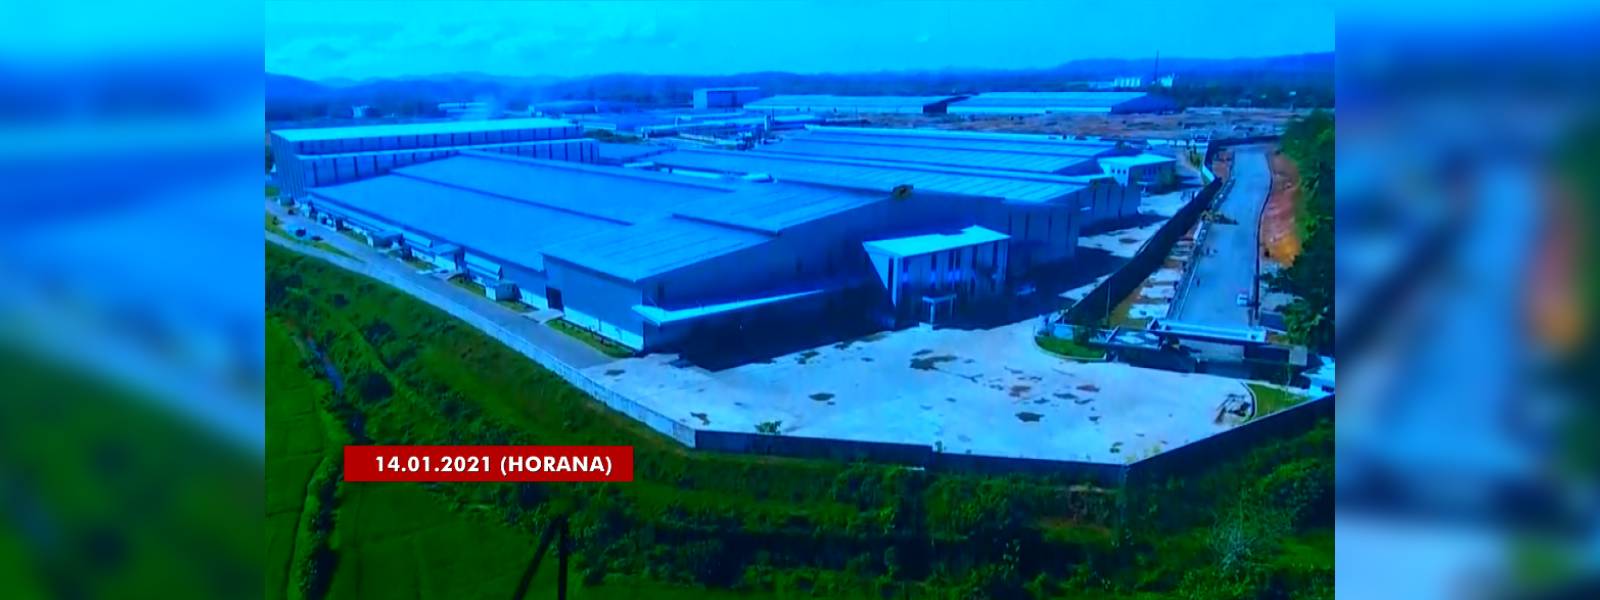 South Asia's largest tyre factory in Horana